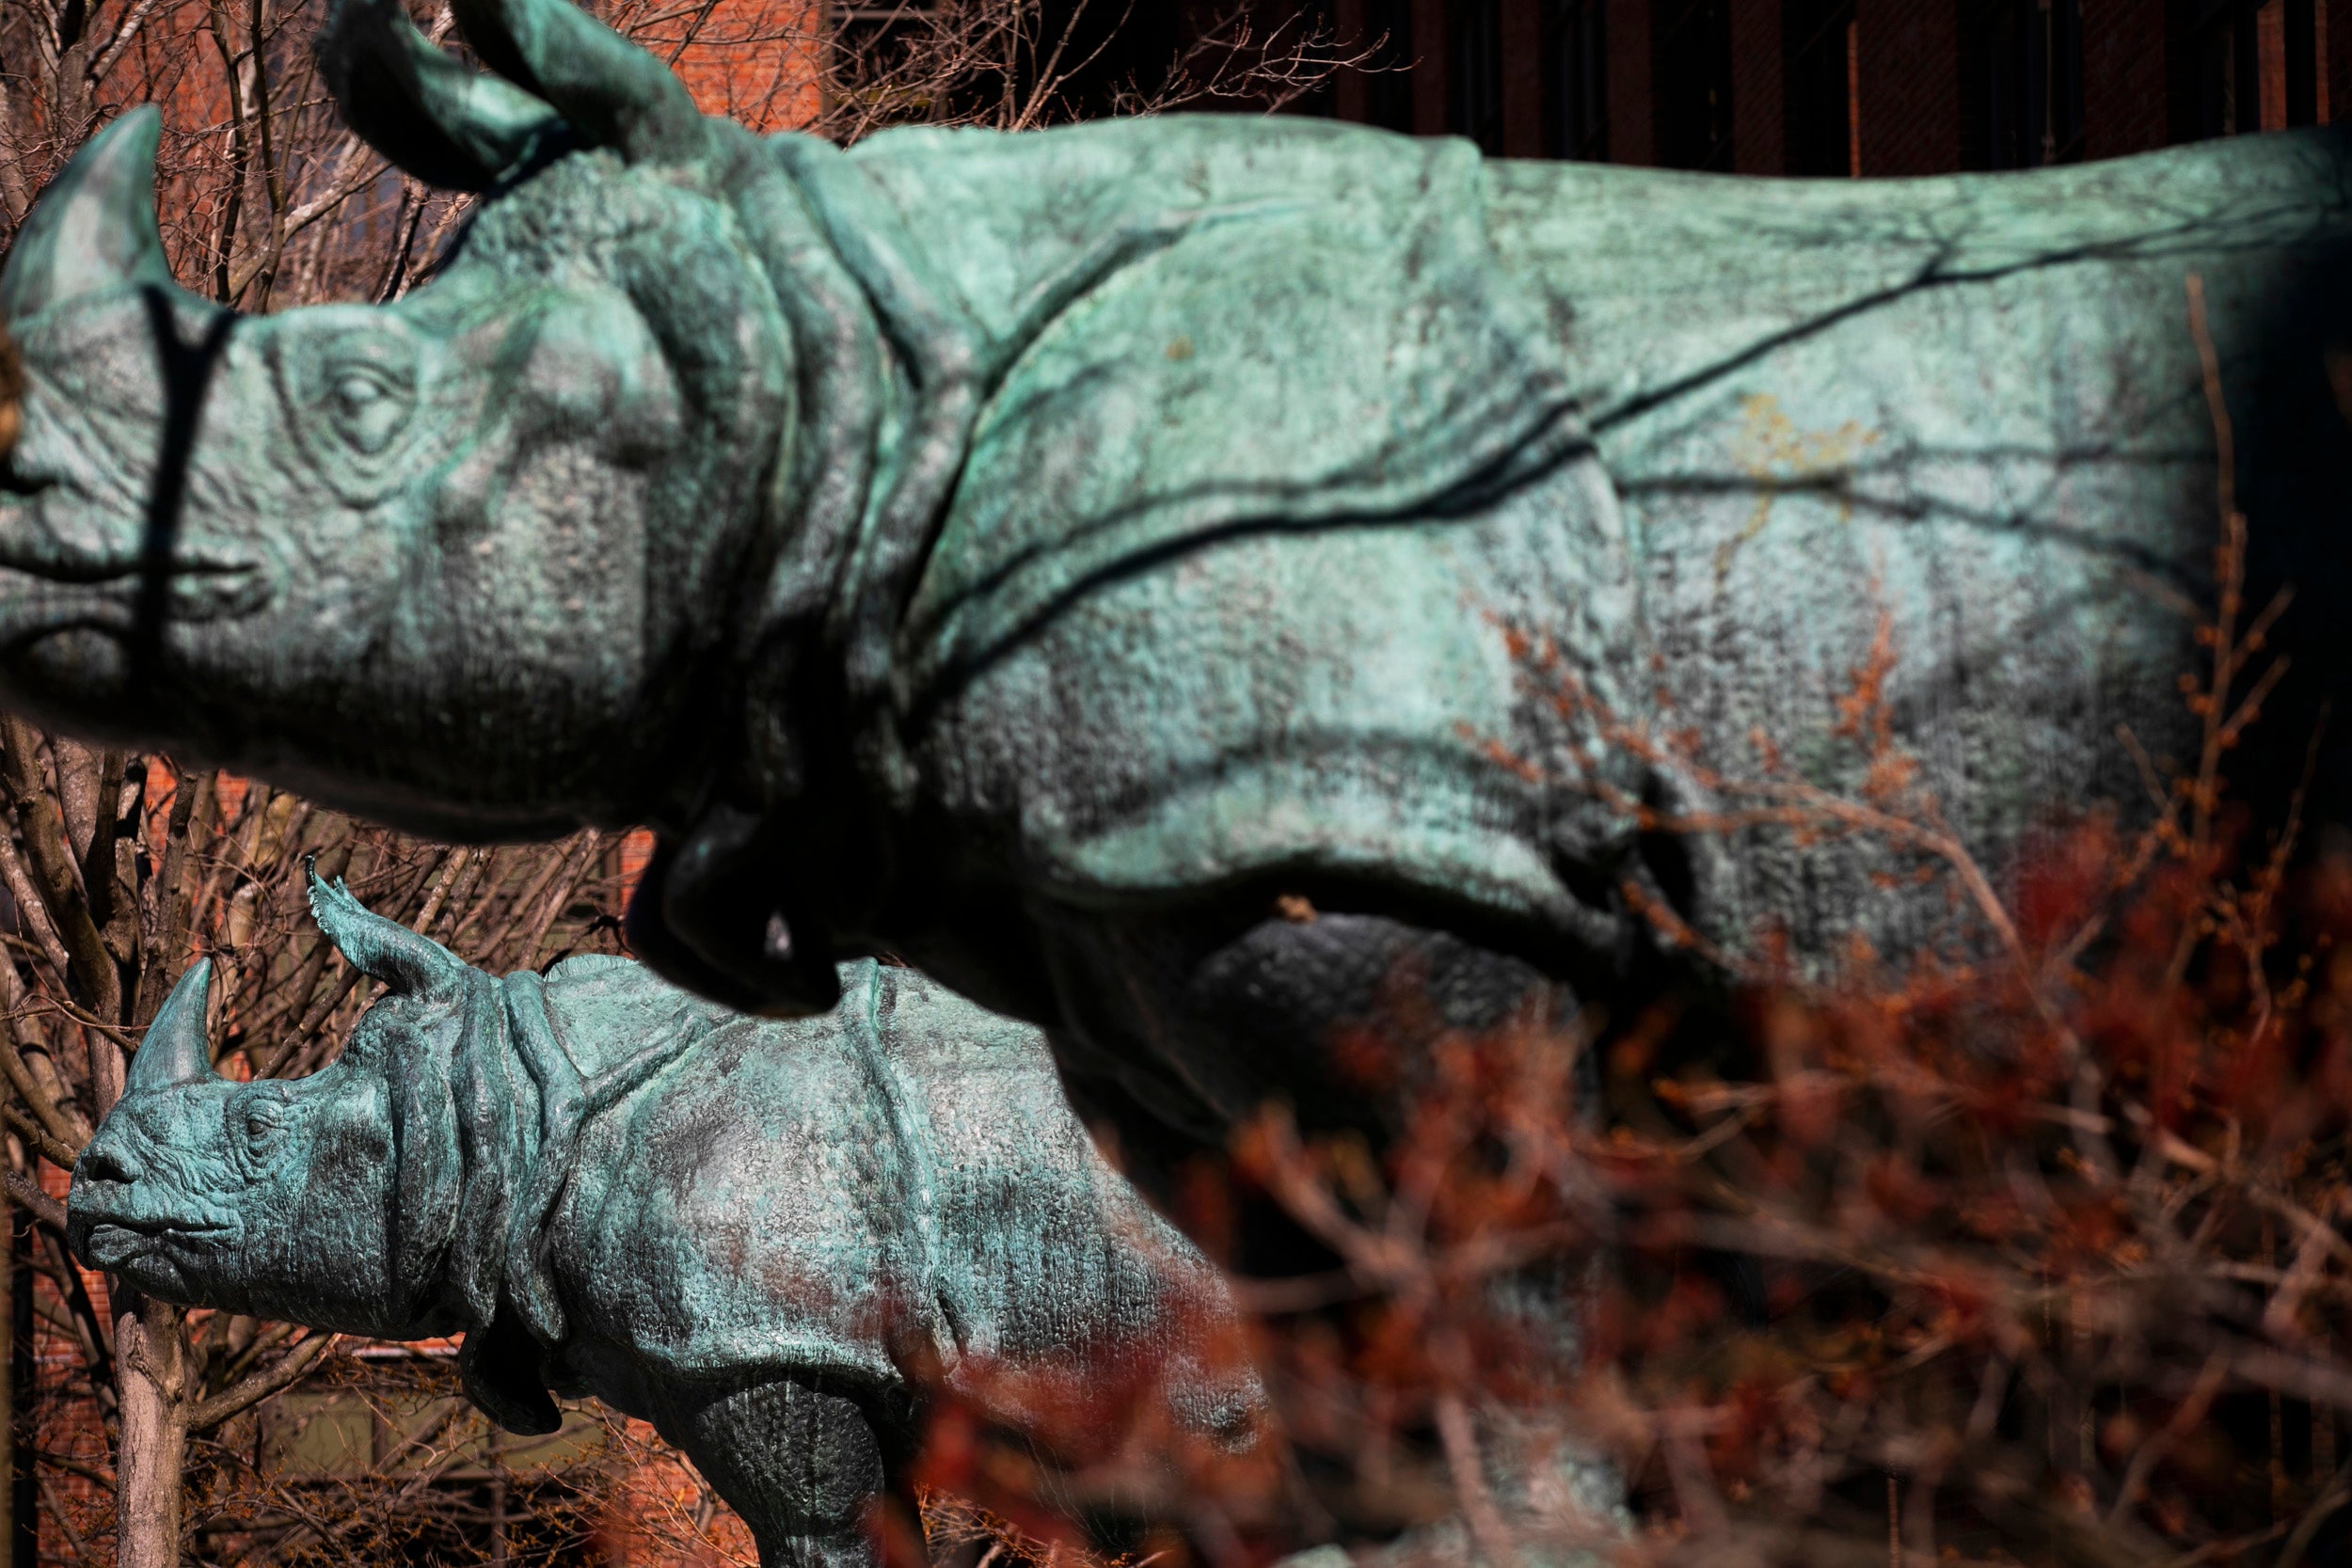 Two rhinos flank the main doors of the Biological Laboratory Building.